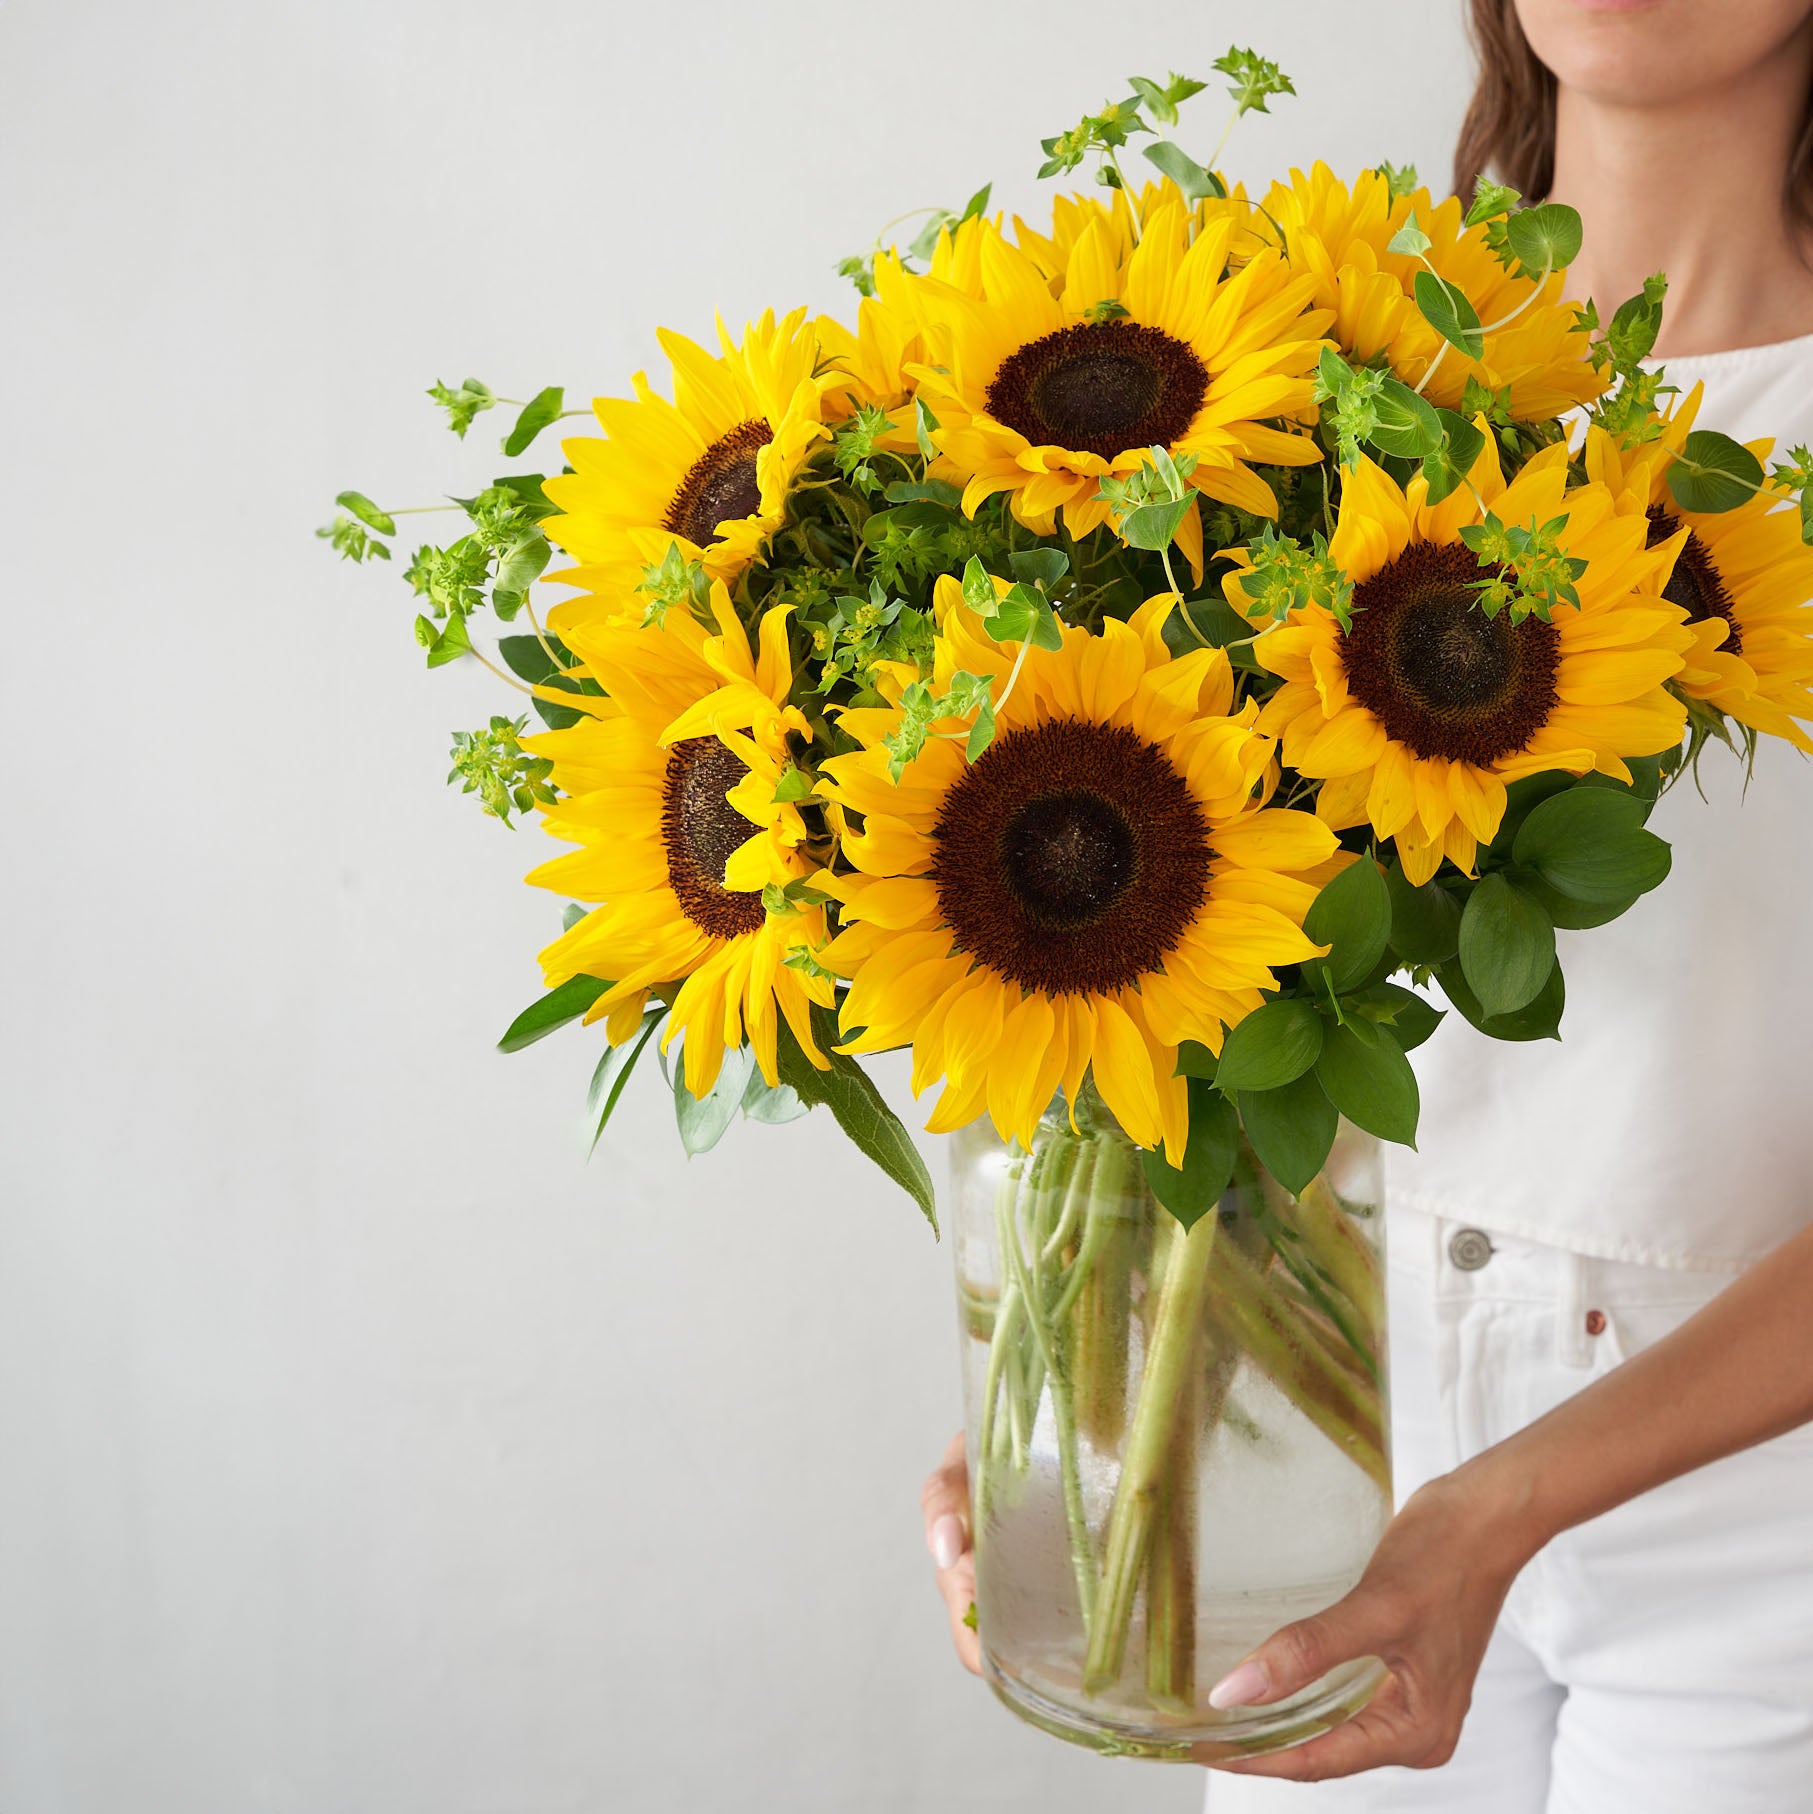 Girl in white holding sunflowers in a clear glass vase